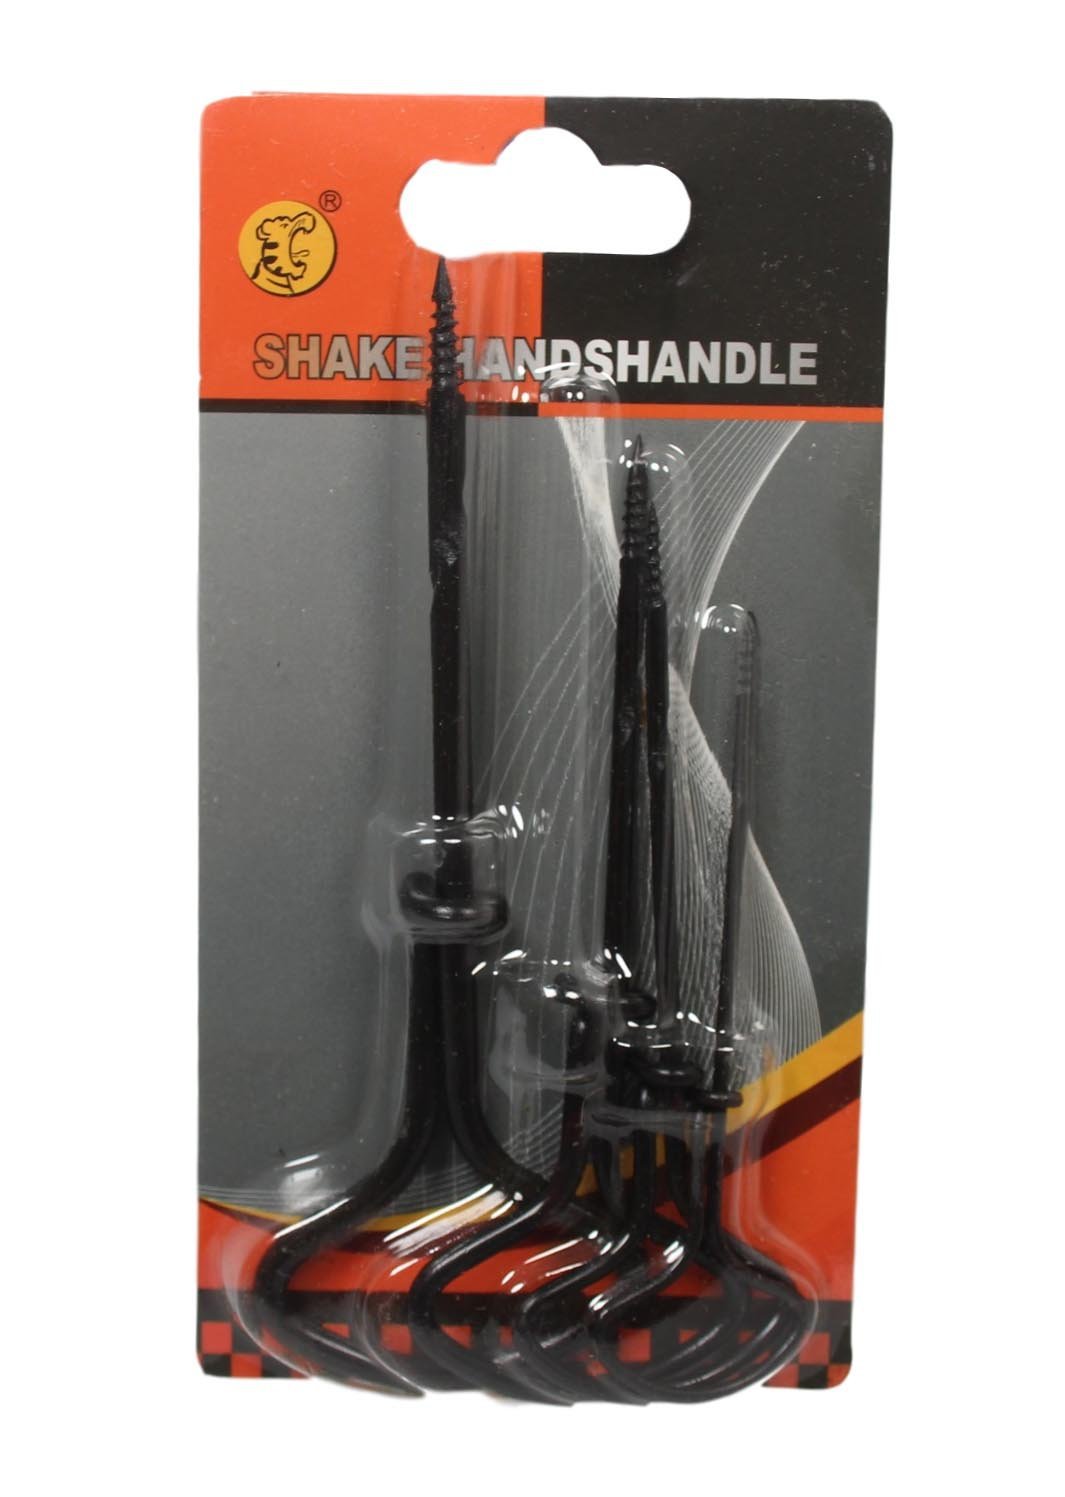 Hand Held Handle Drills DIY Home Garden Hand Use 4 Pack 5377 (Large Letter Rate)